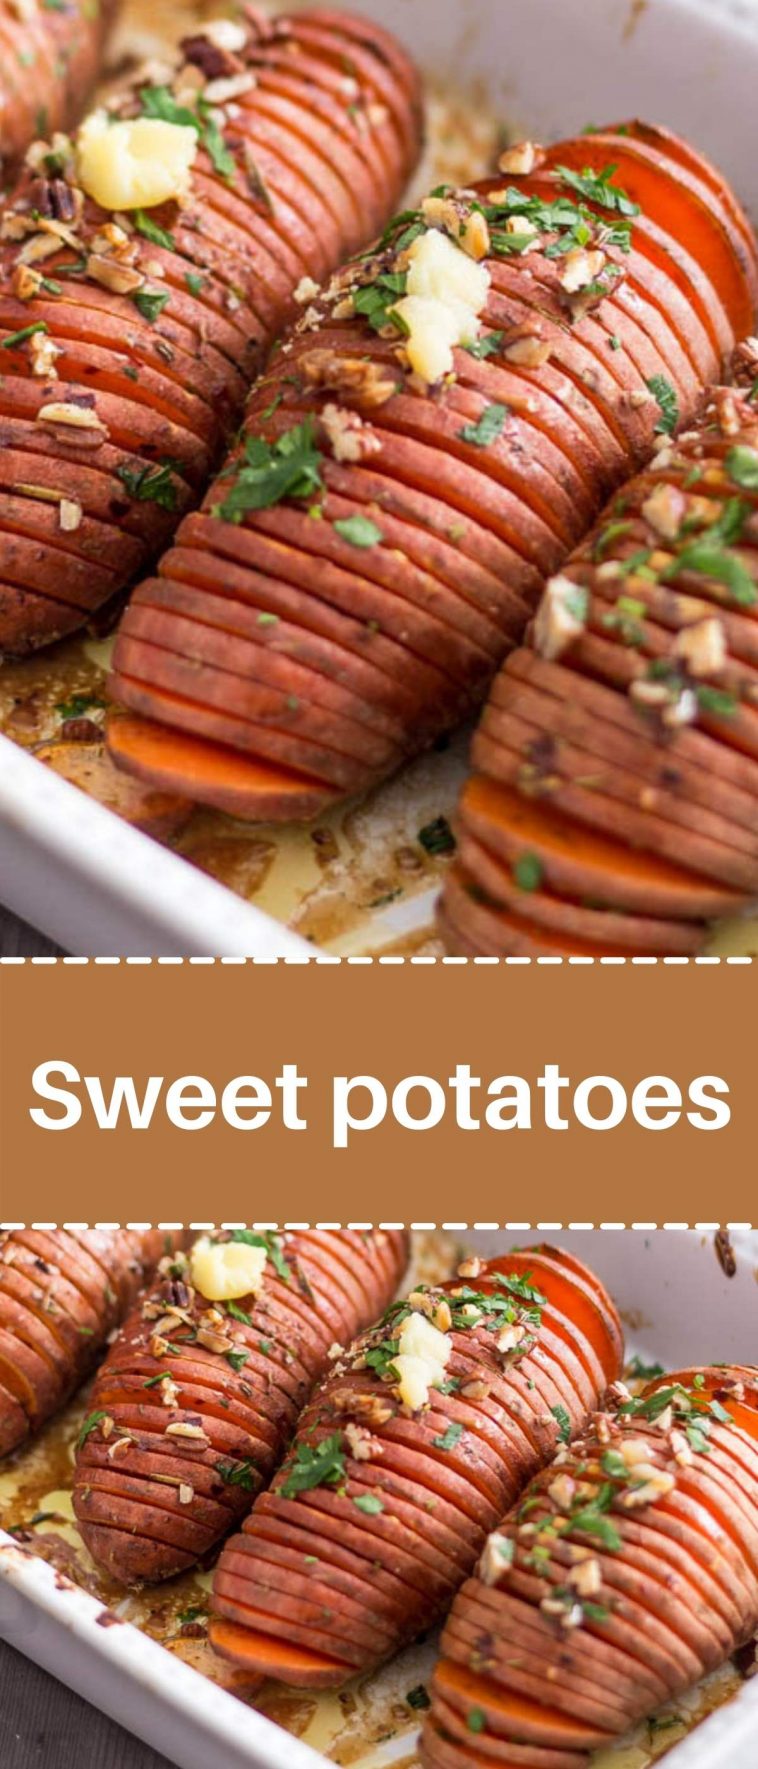 Sweet potatoes – They help ease stress, are full of nutrients and naturally fight cancer.